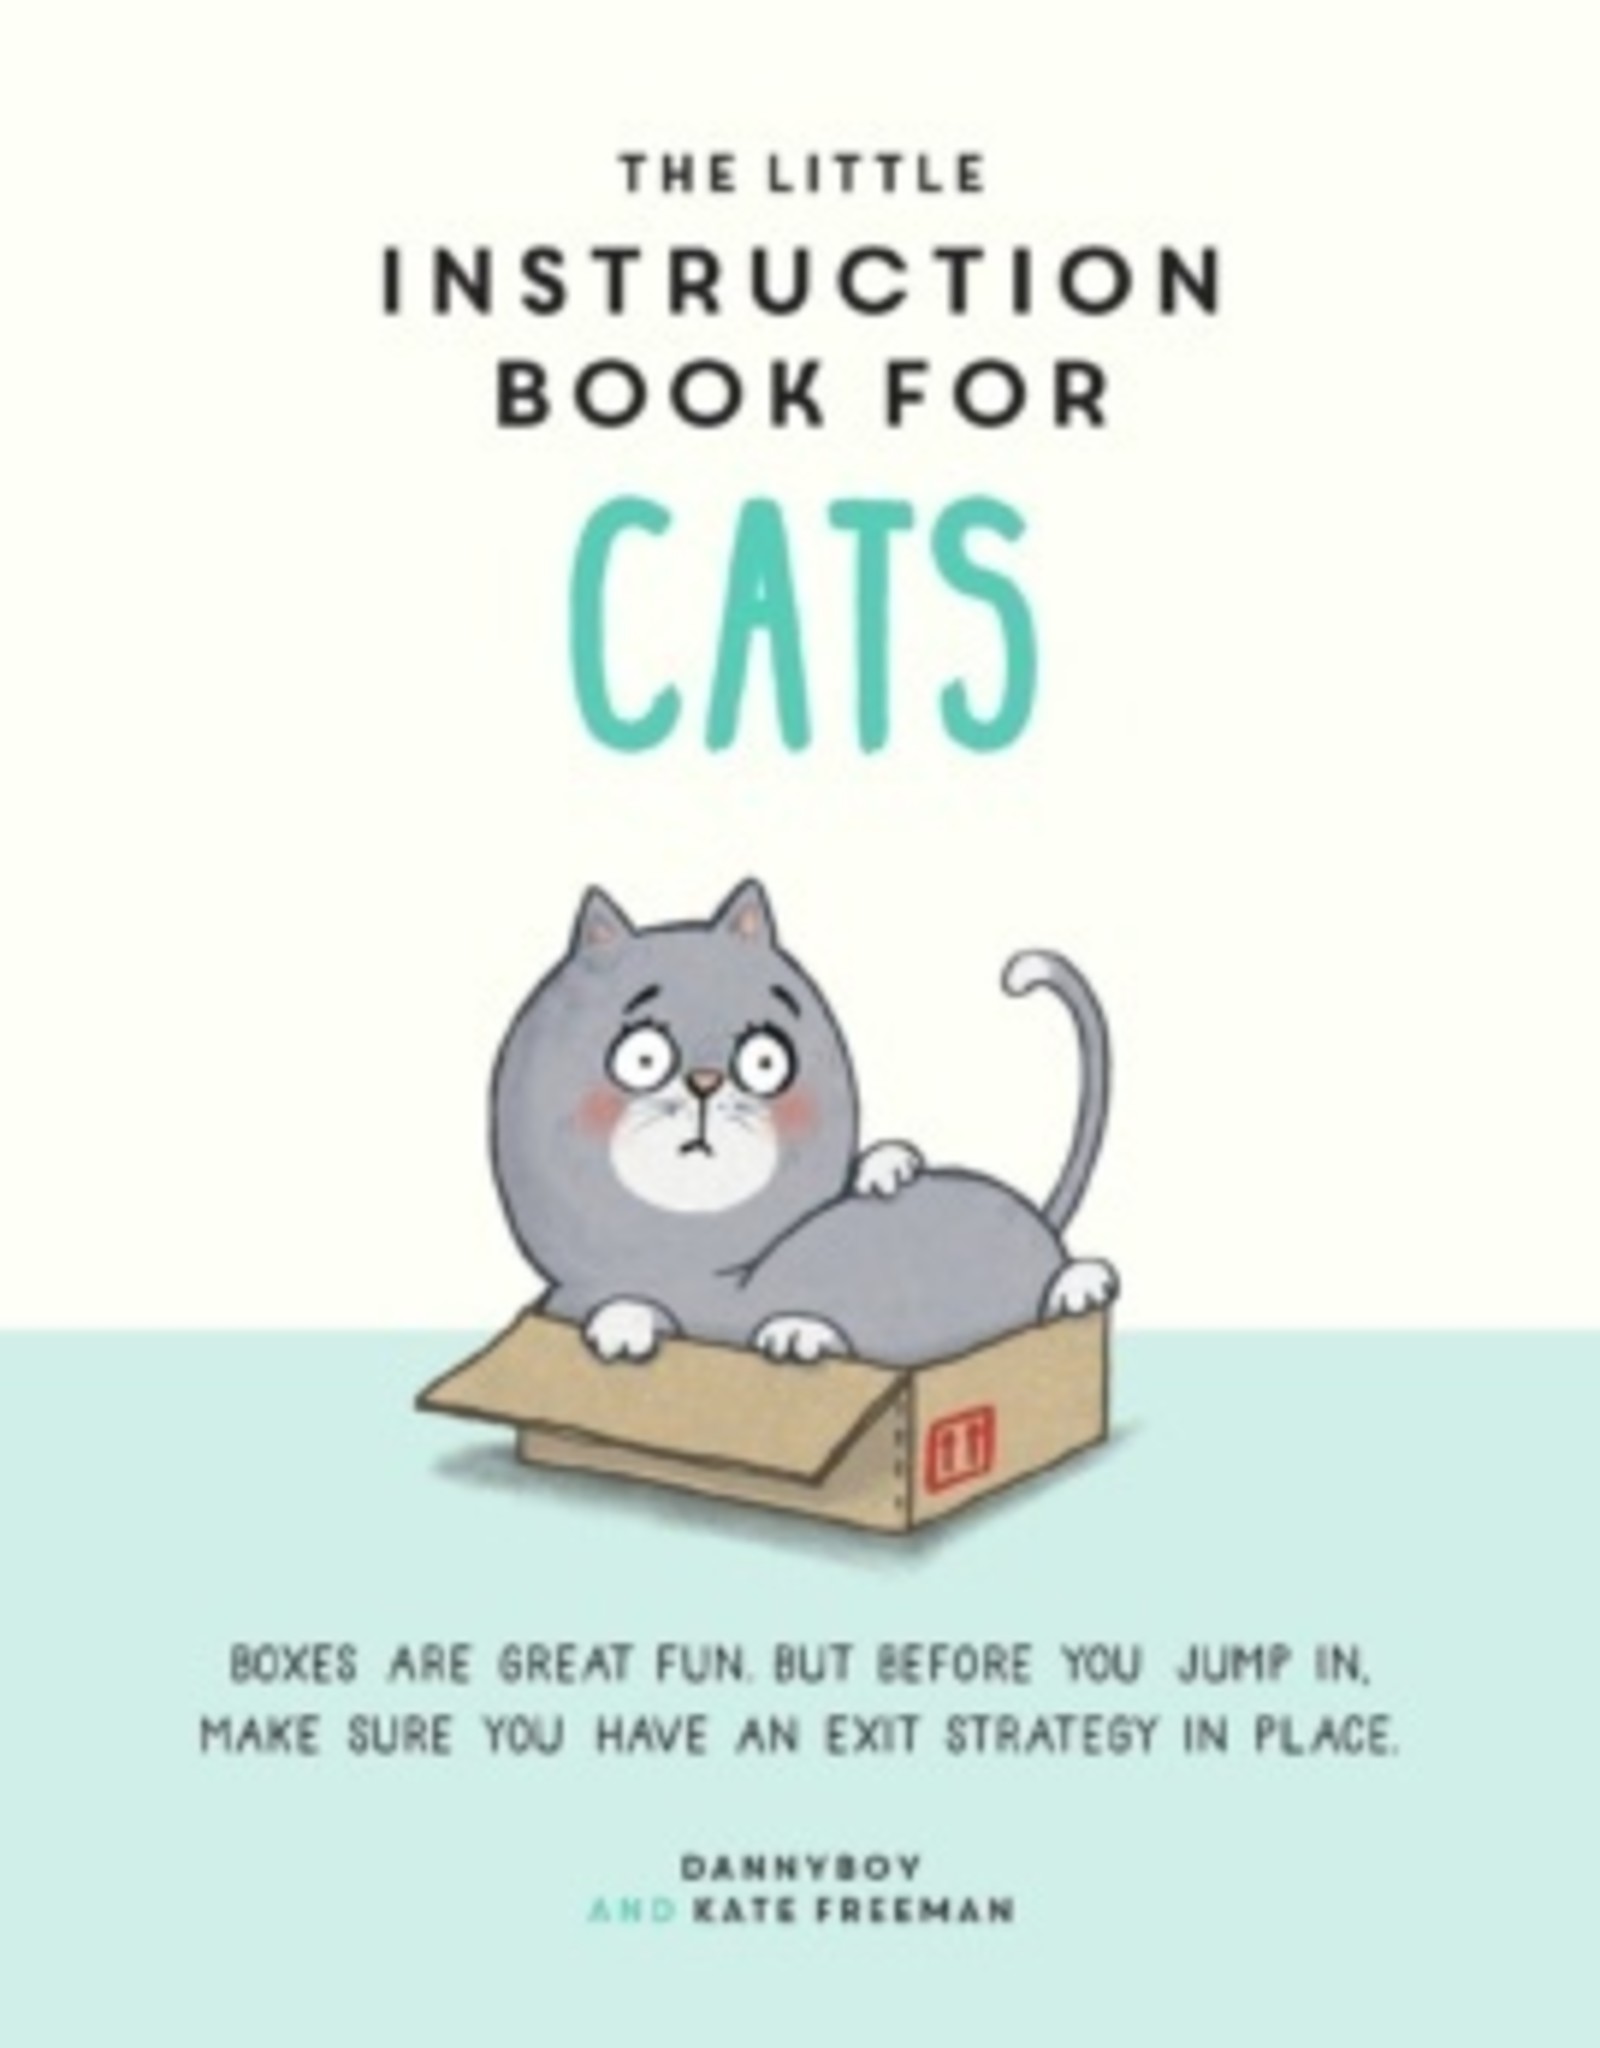 Dannyboy, Kate Freeman The Little Instruction Book For Cats